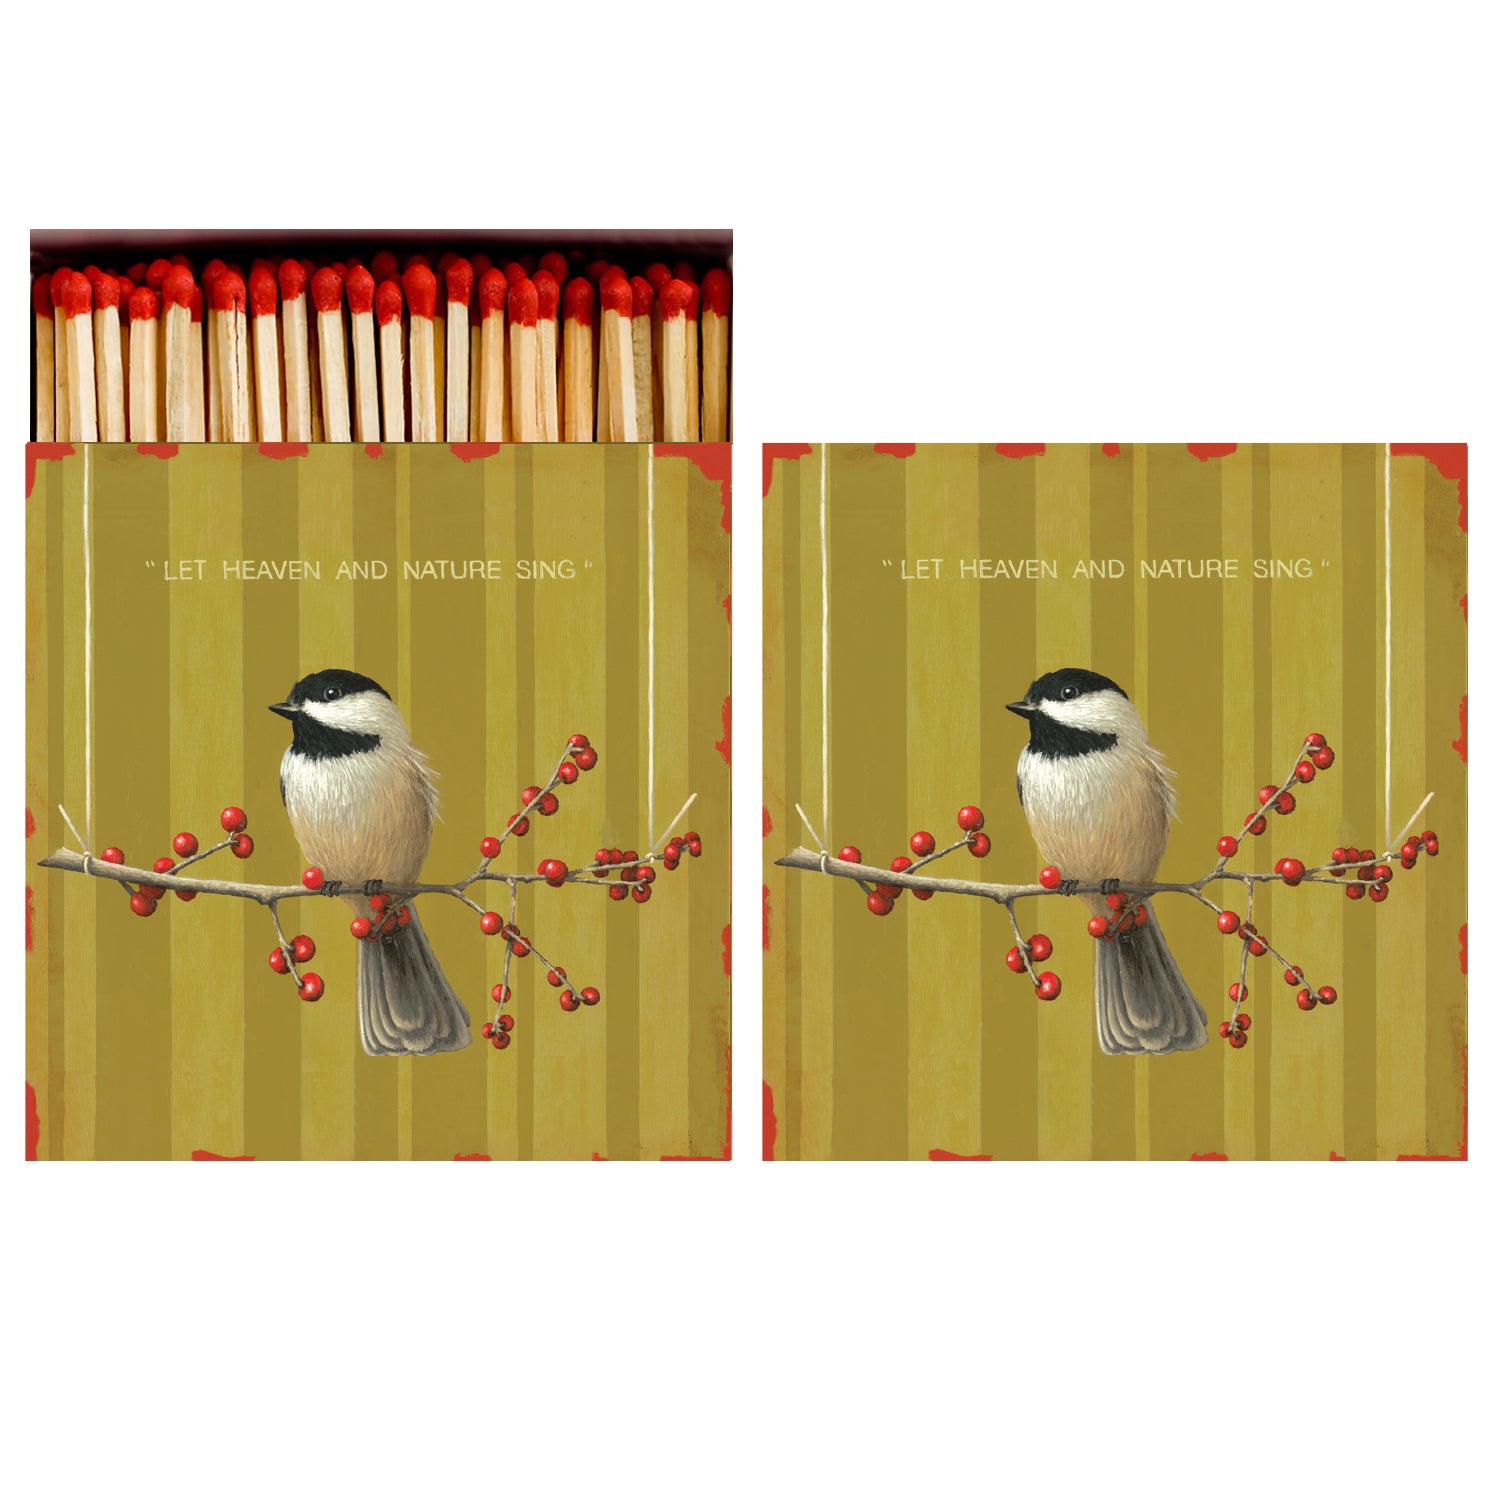 These exquisite Heaven &amp; Nature Matches by Hester &amp; Cook feature a beautiful chickadee perched on a branch adorned with delicious berries. They showcase stunning art by David Arms and make perfect holiday gifts.